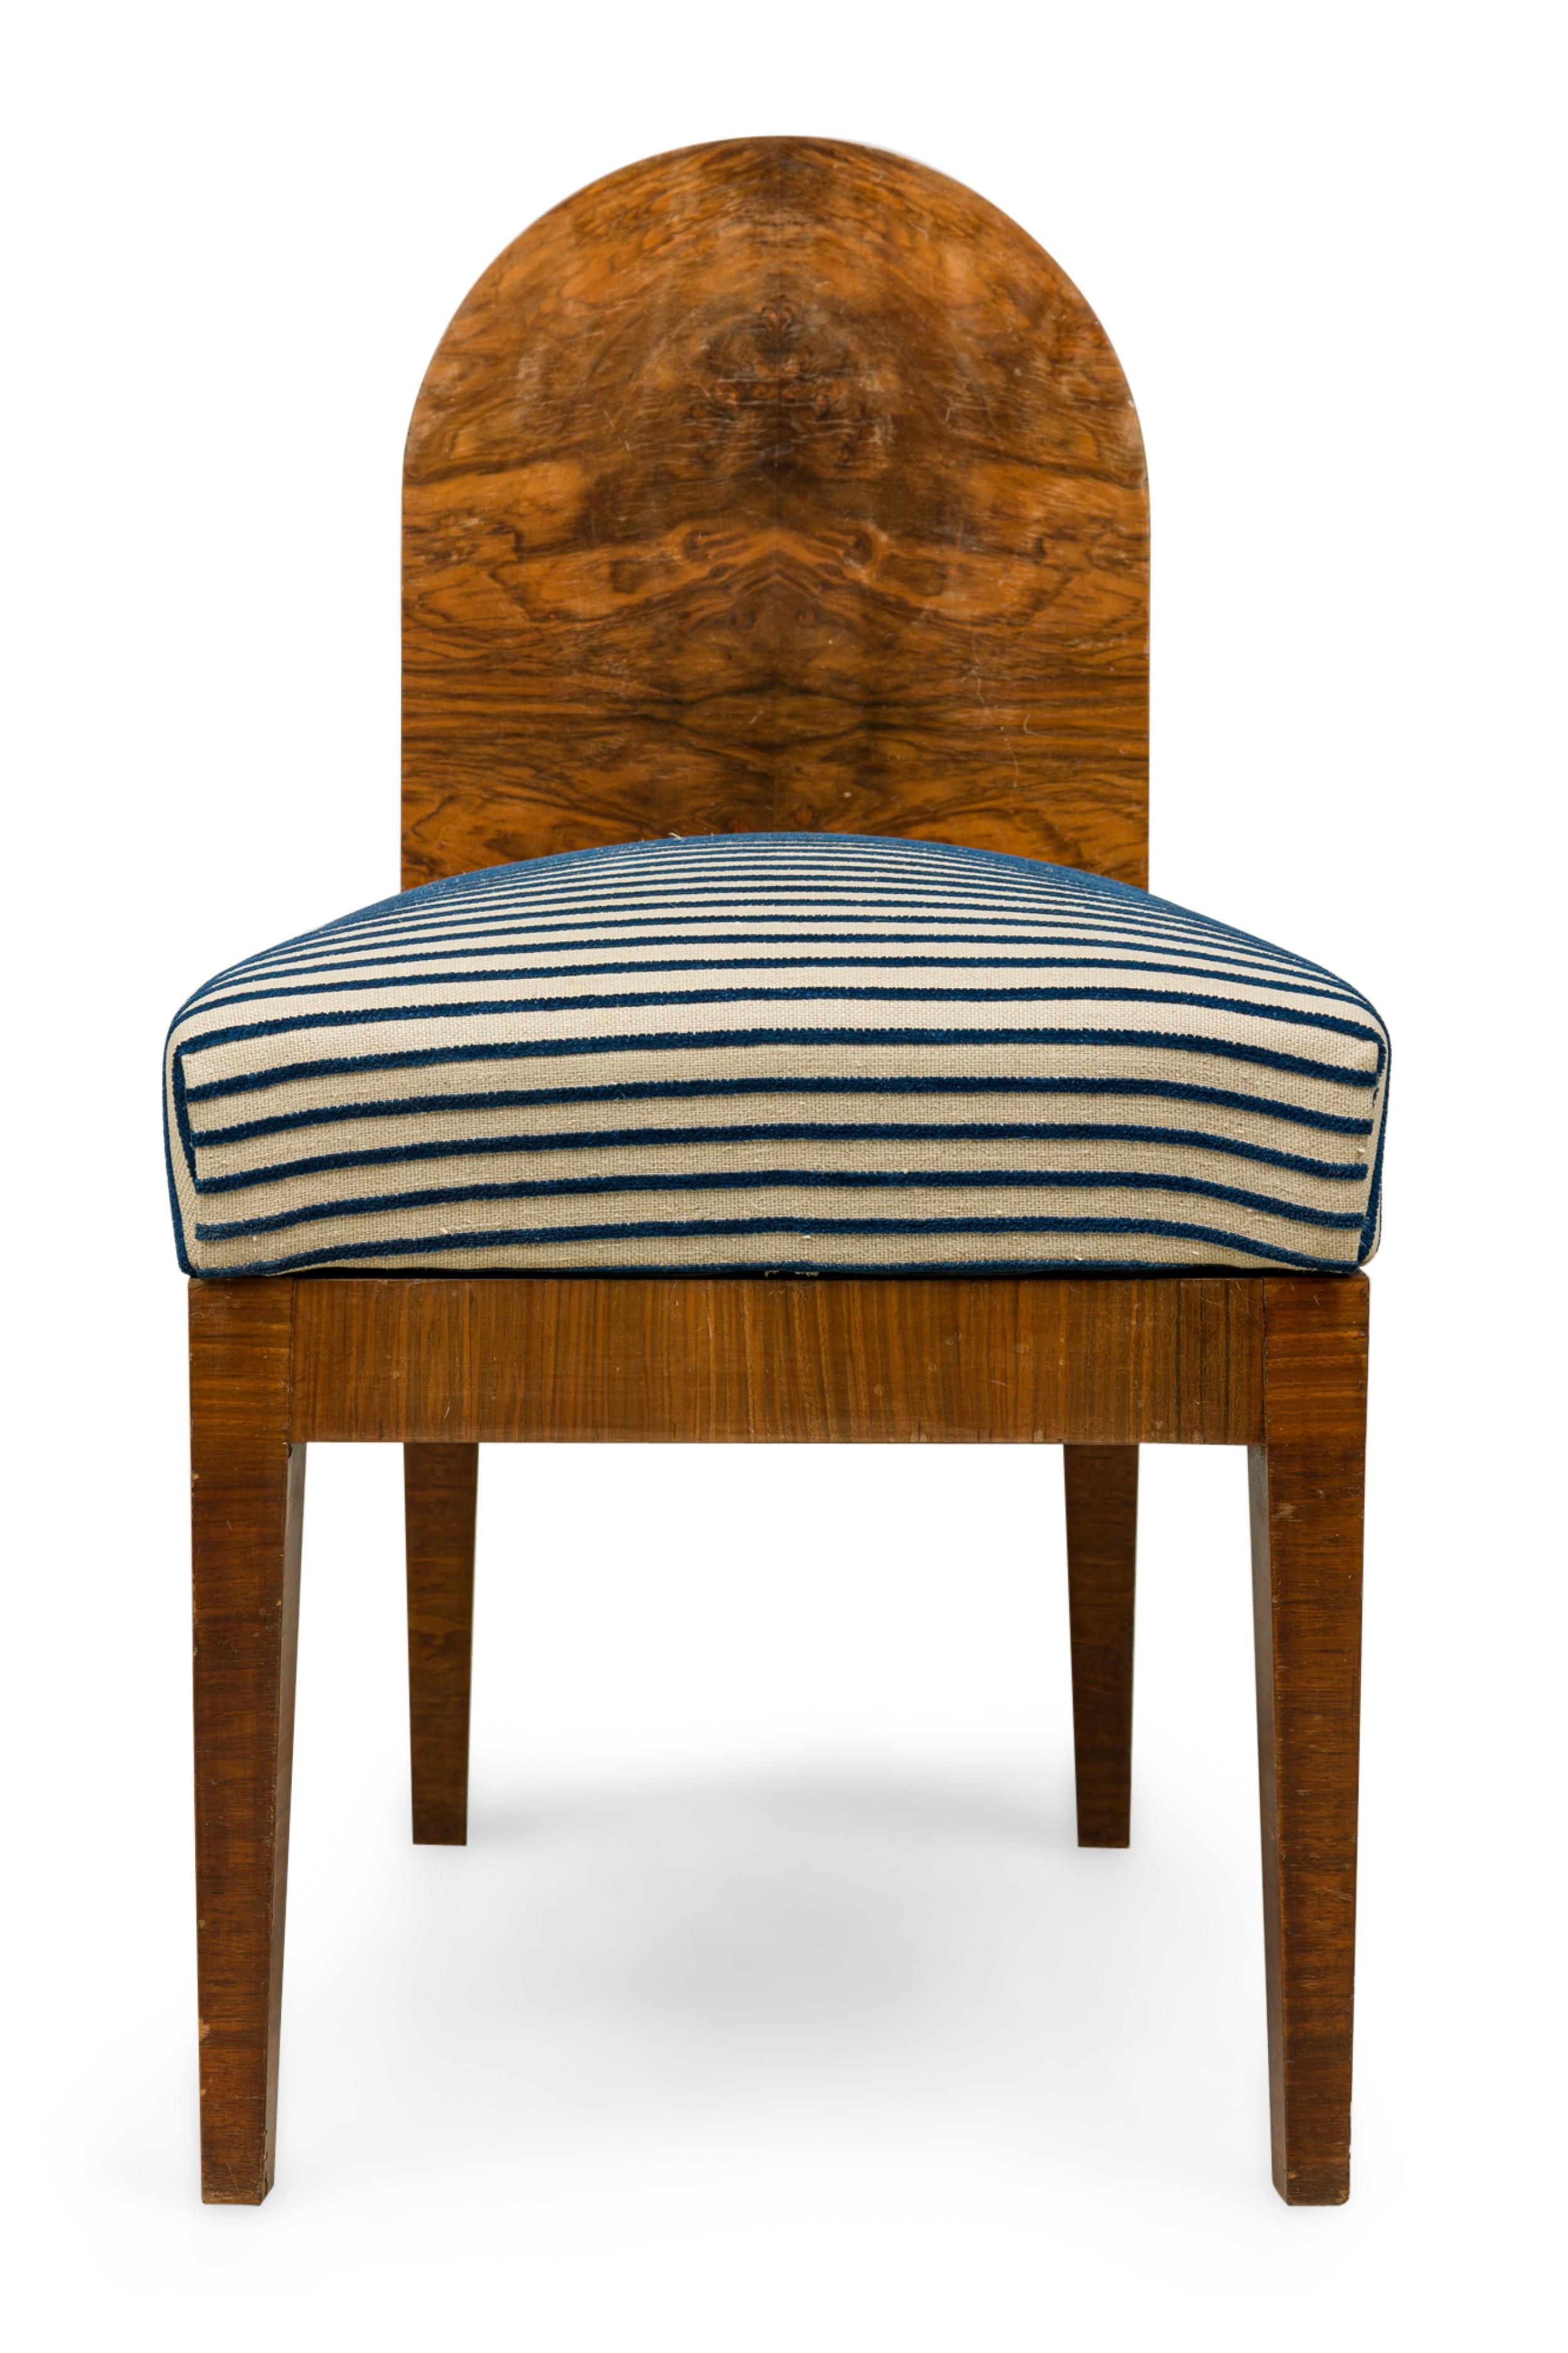 SET of 4 Austrian Biedermeier-style chairs with burl wood veneer spoon backs and angled slip seat cushions upholstered in a blue and white striped fabric. (PRICED AS SET)
 

 Minor wear to finish
